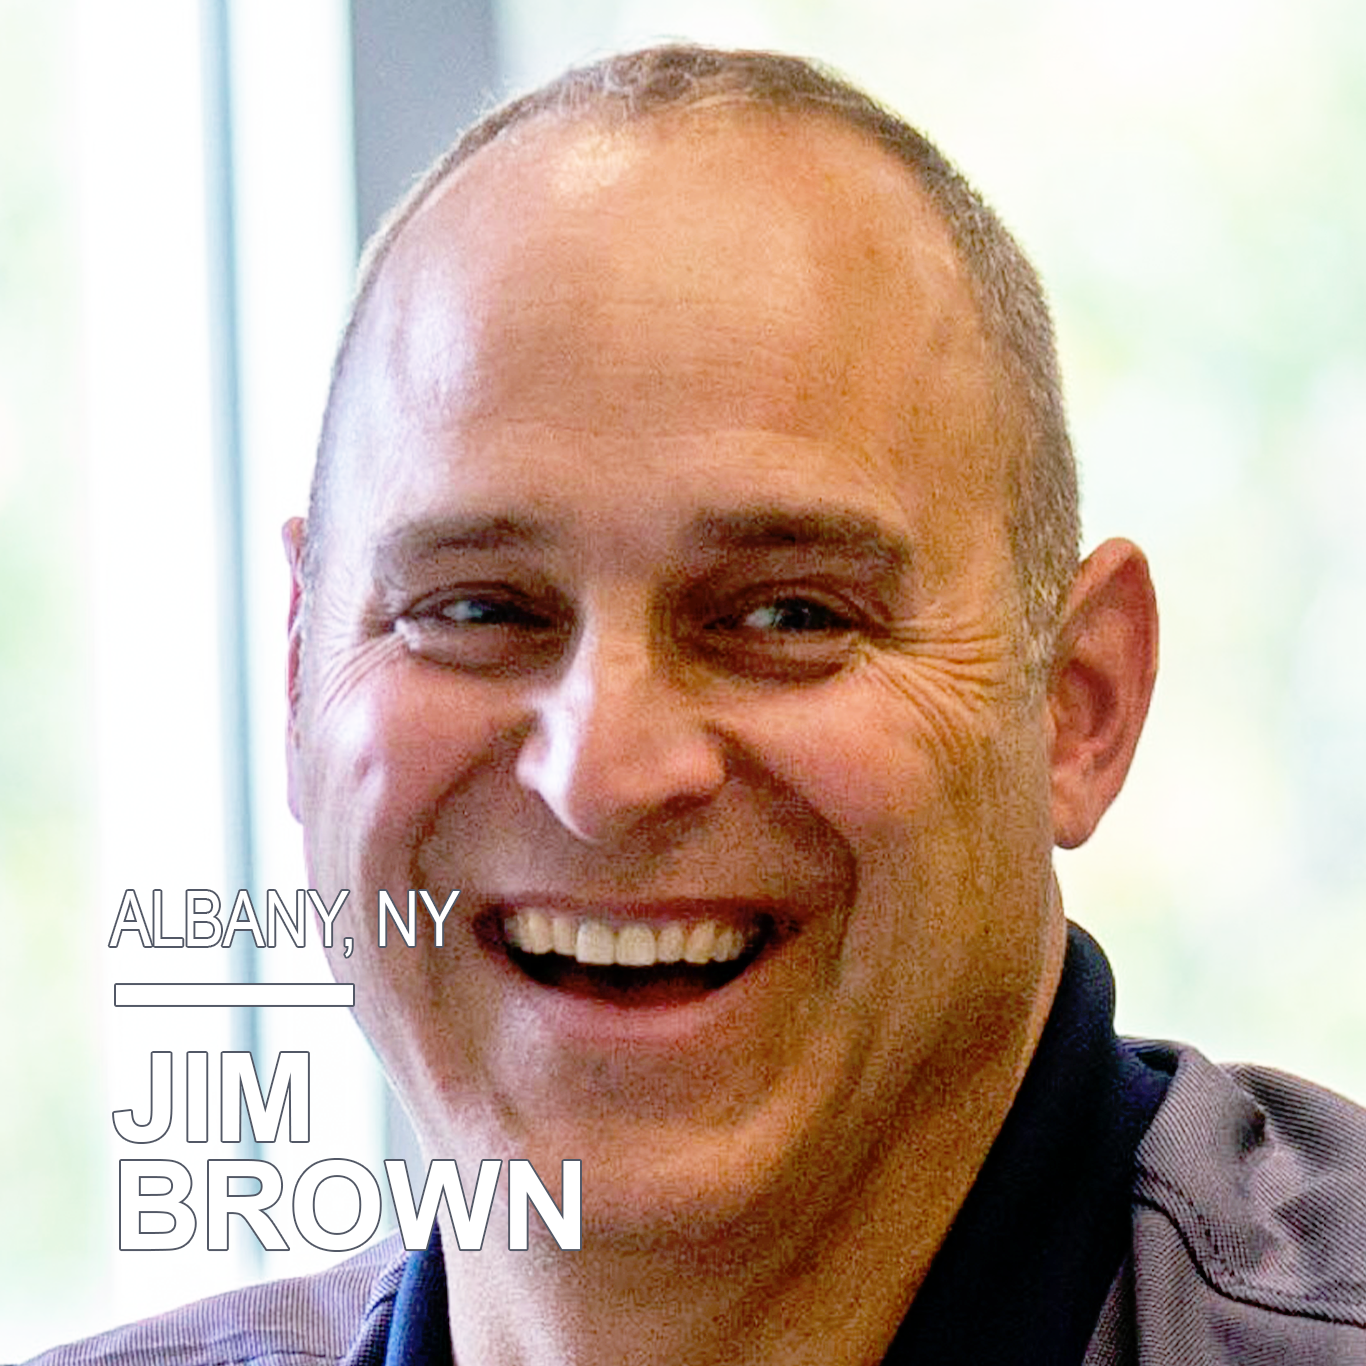 Jim Brown is a Grade 7 and 8 STEM teacher, teaching CAD/CAM and Python® programming at Sand Creek Middle School in Albany, NY, and a coach for several KidWind teams. He helped create the STEM program for South Colonie Central School District, which impacts every student in the district. For Jim, the best part of teaching is sparking curiosity in students and empowering them through education. He’s passionate about energy and problem-based learning. As a Certified Energy Manager, he also serves as his district’s on-site energy manager, conducting energy audits of all district facilities on a regular basis.